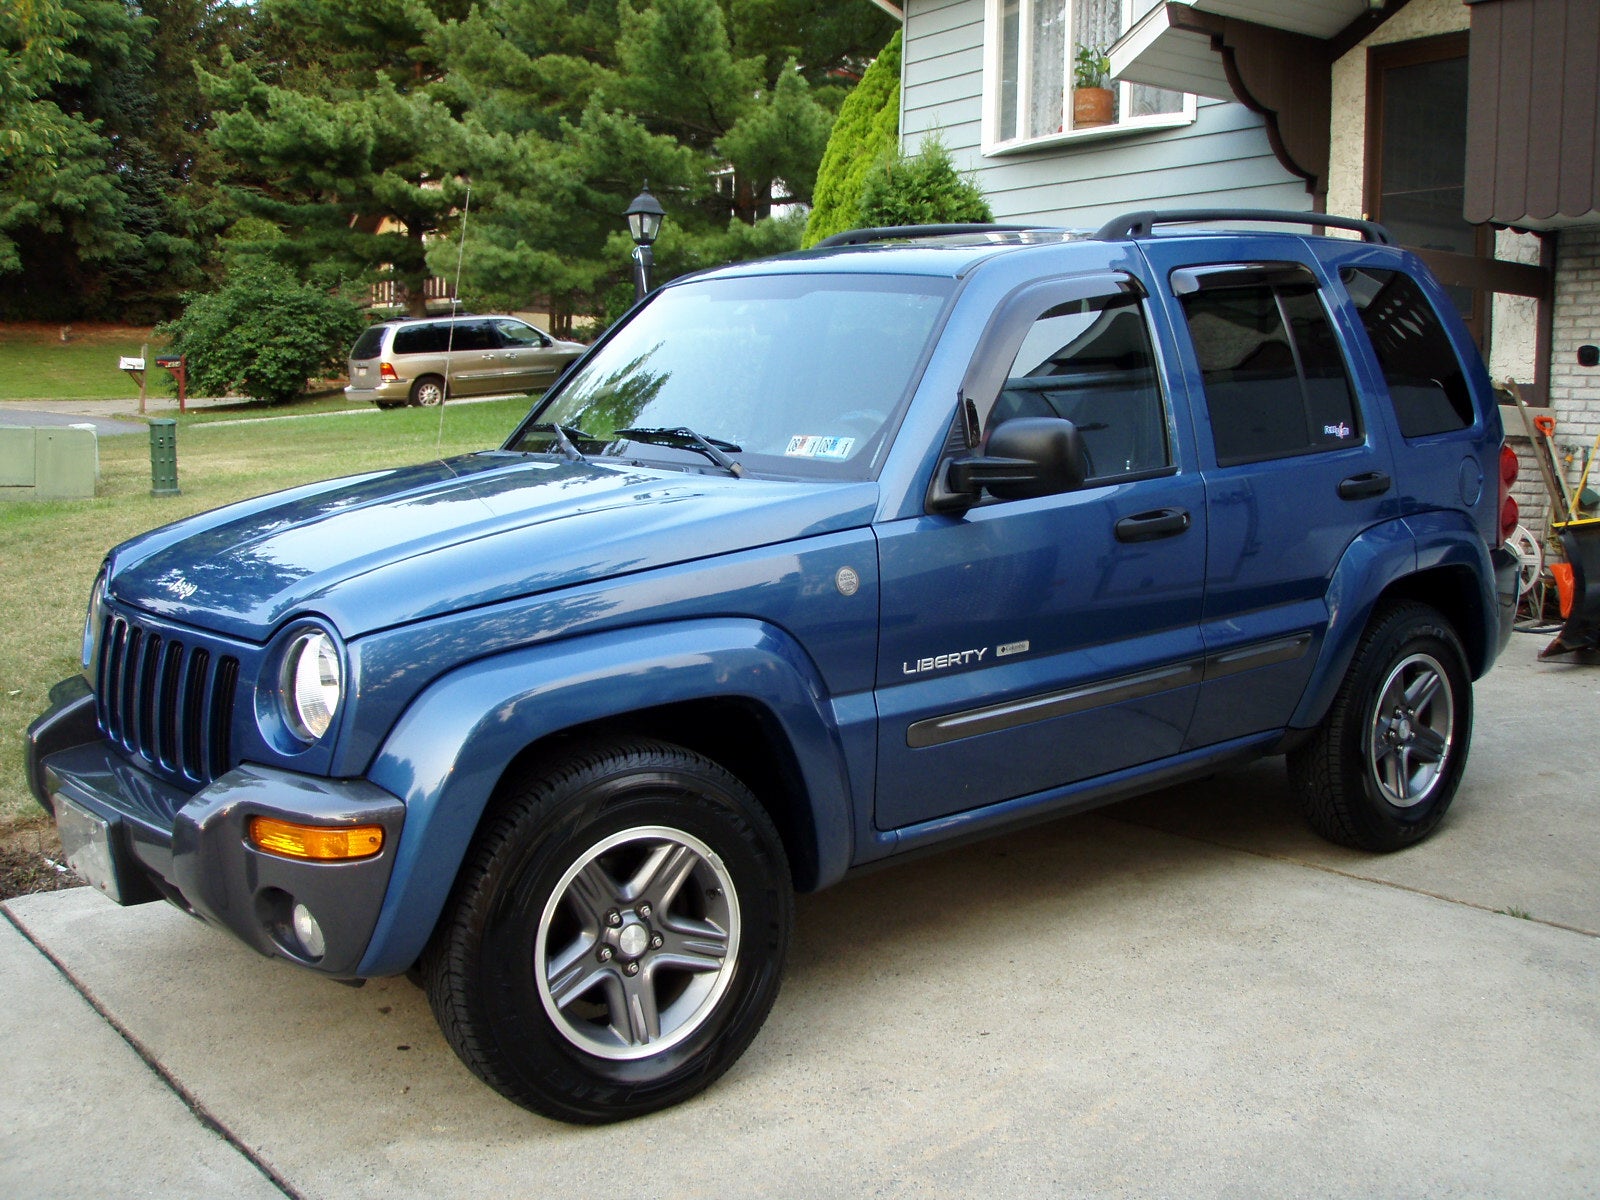 What size tires are on a 2004 jeep liberty #4